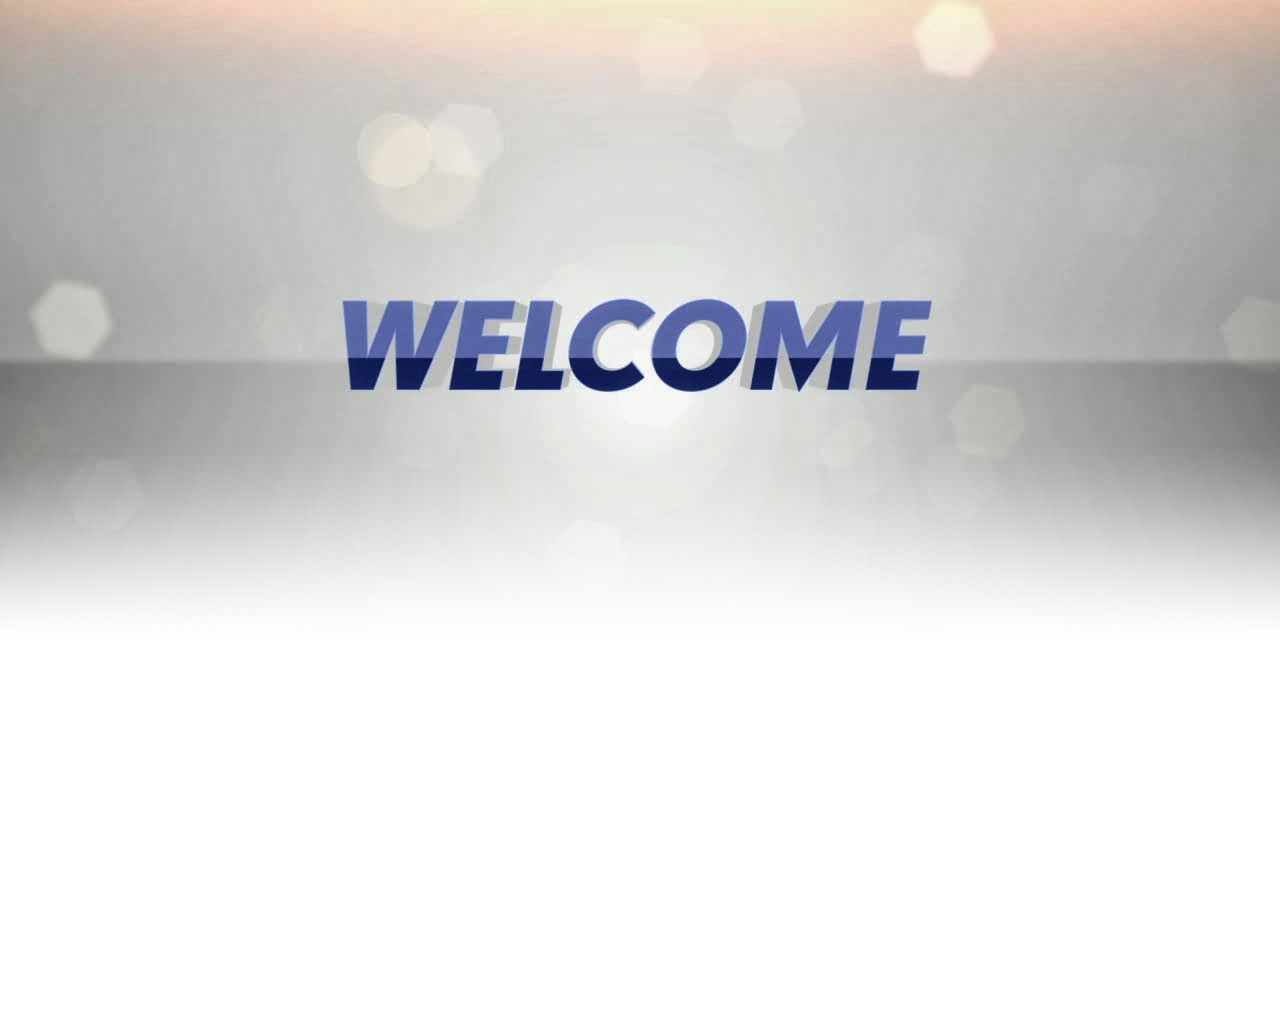 Welcome design